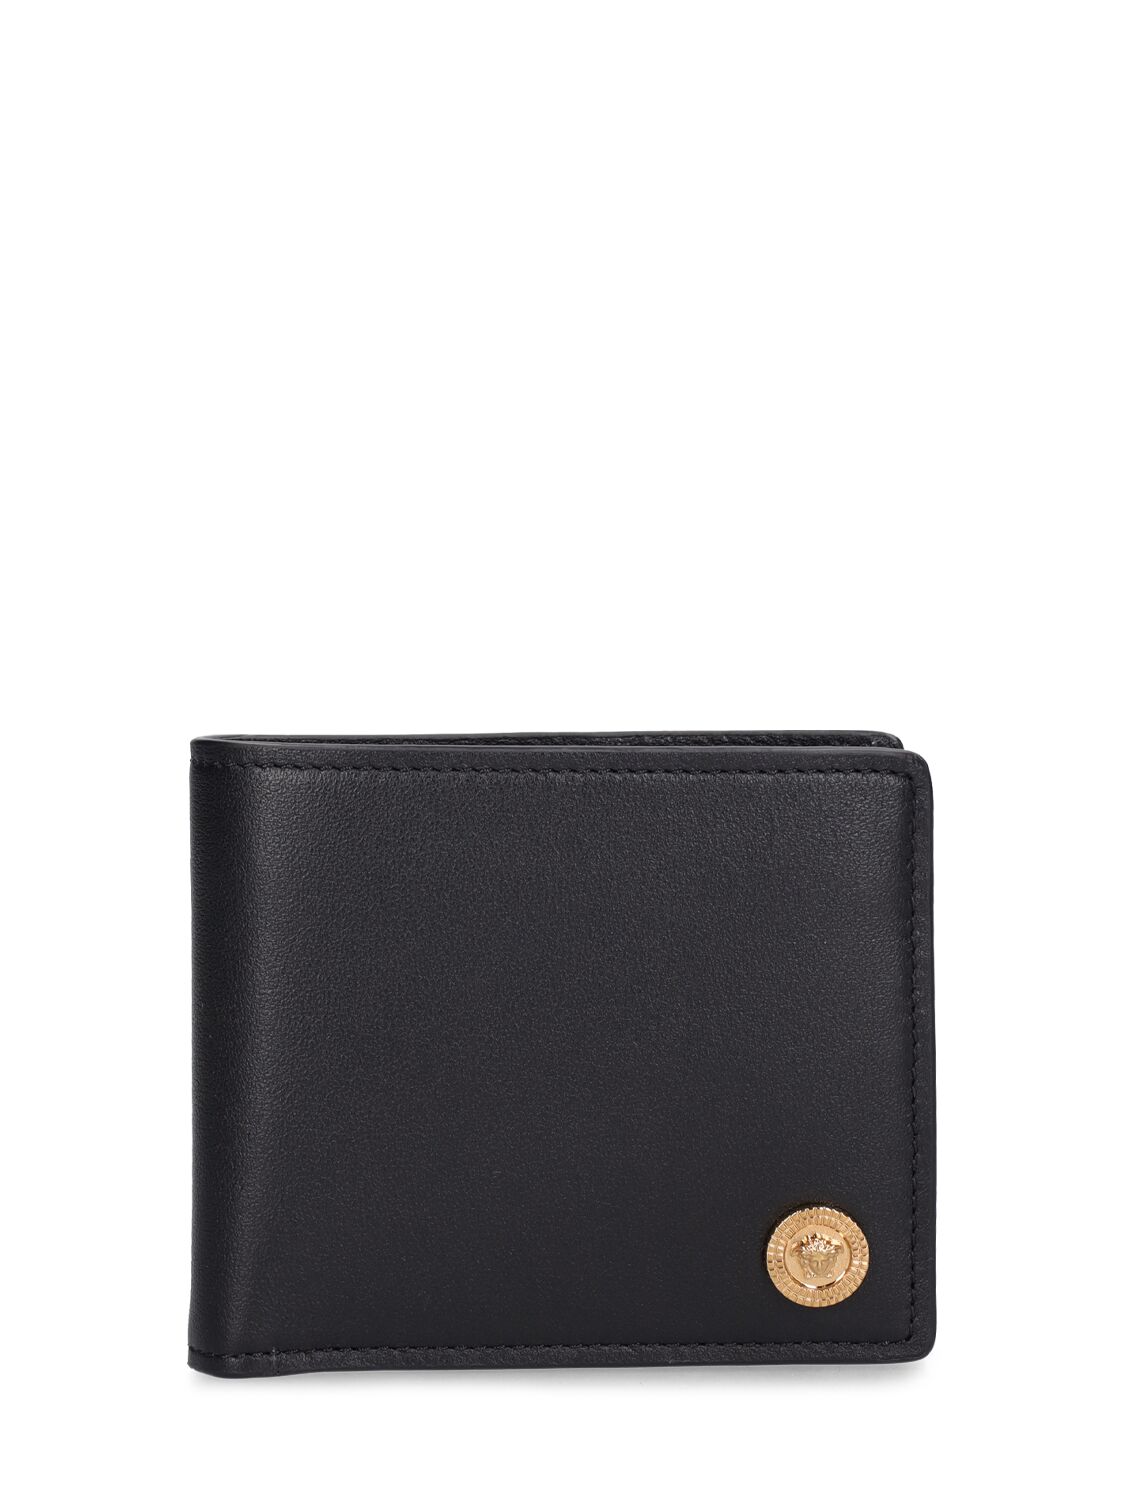 Image of Leather Wallet W/coin Pocket